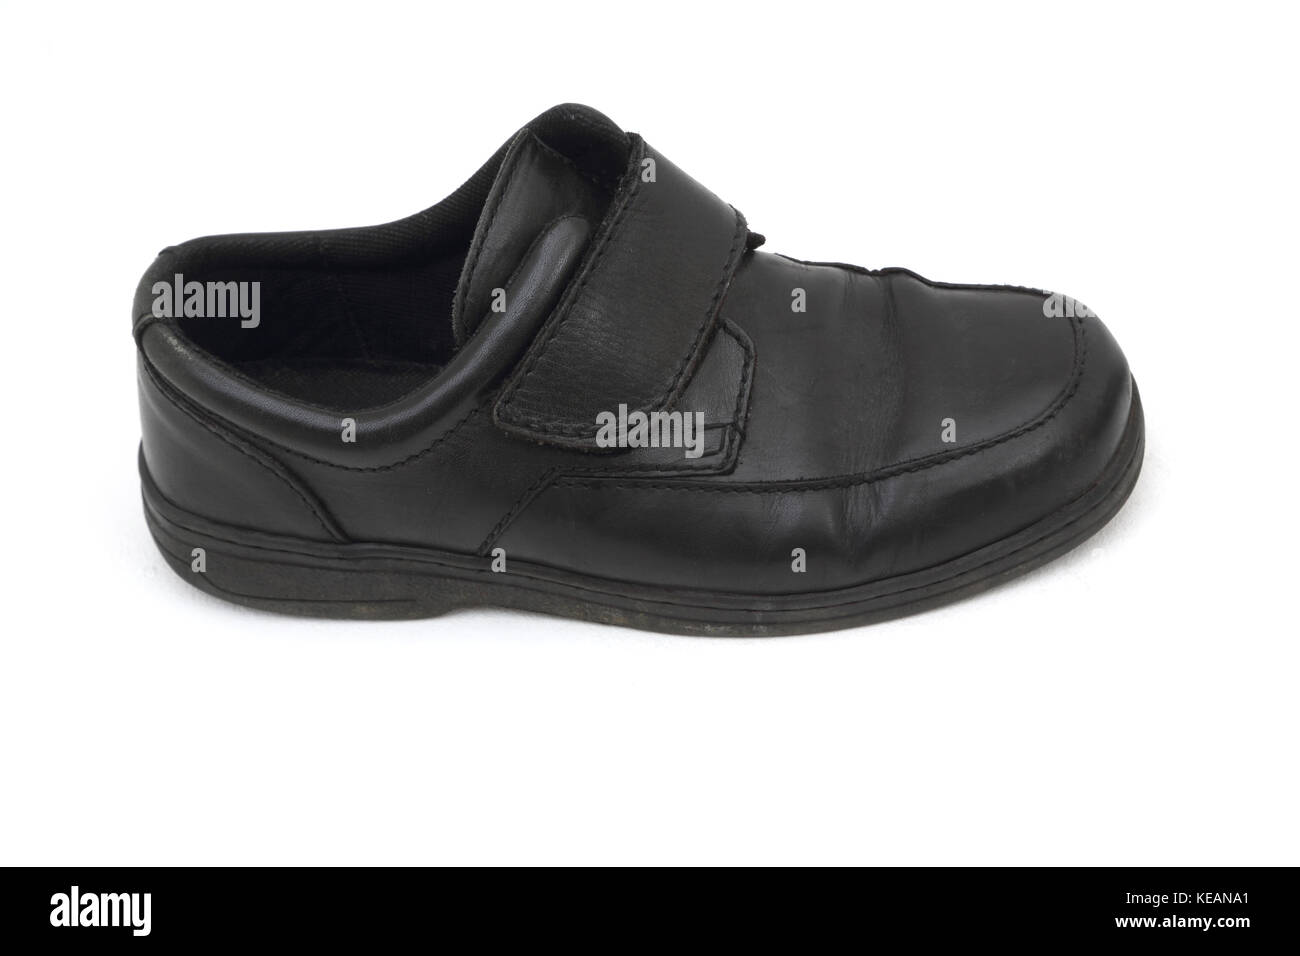 Men's Black Leather Shoes with Velcro Stock Photo